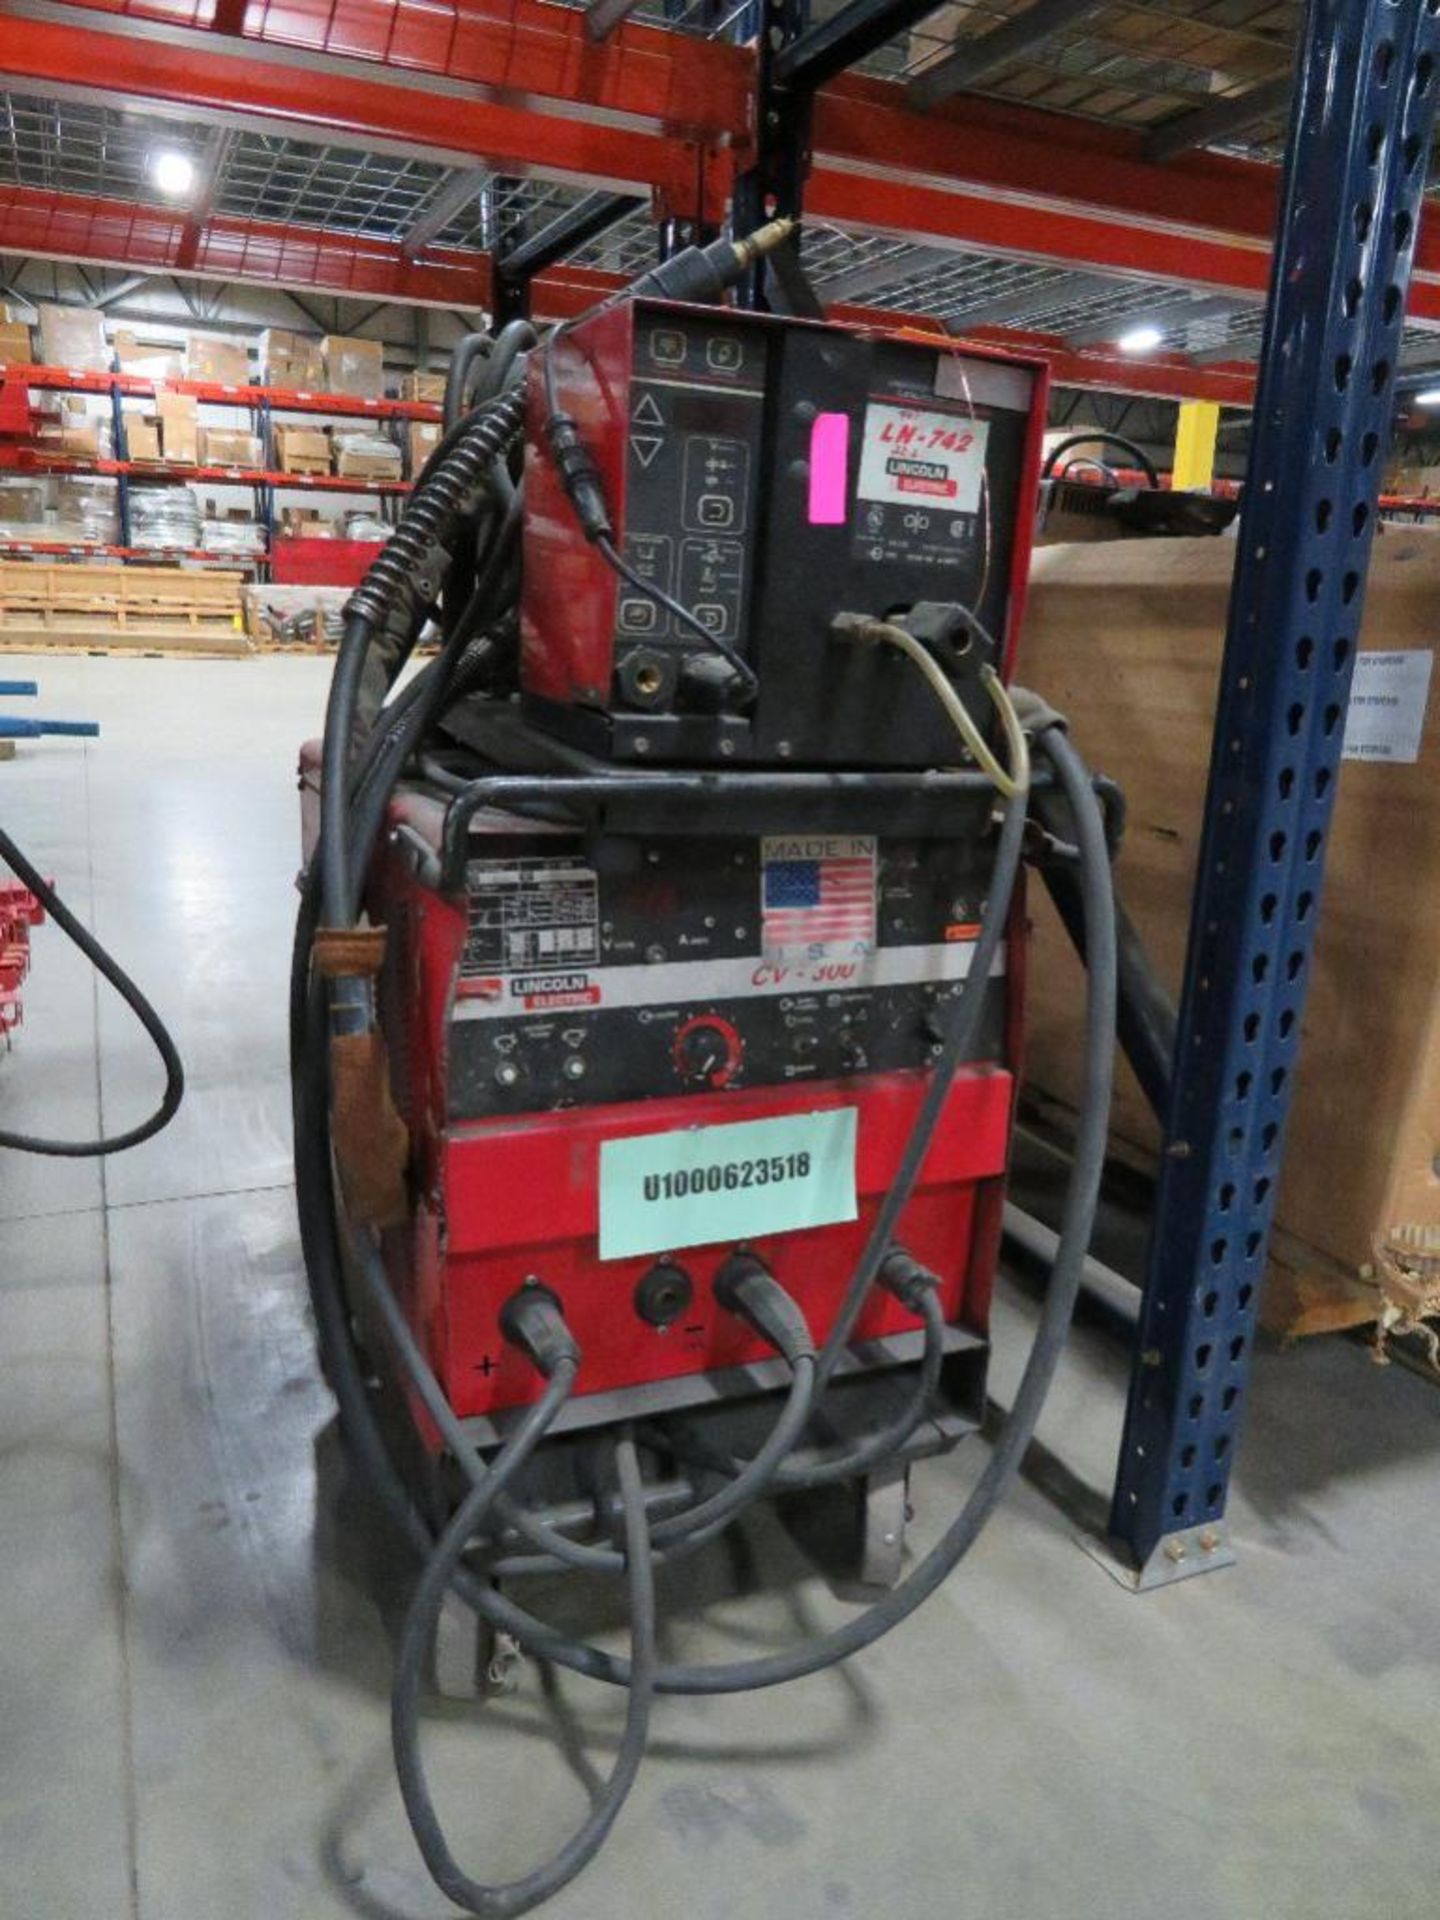 Lincoln 300 Amp Electric MIG Welder Model CV-300, S/N U1000623518, with Lincoln LN-742 Wire Feed